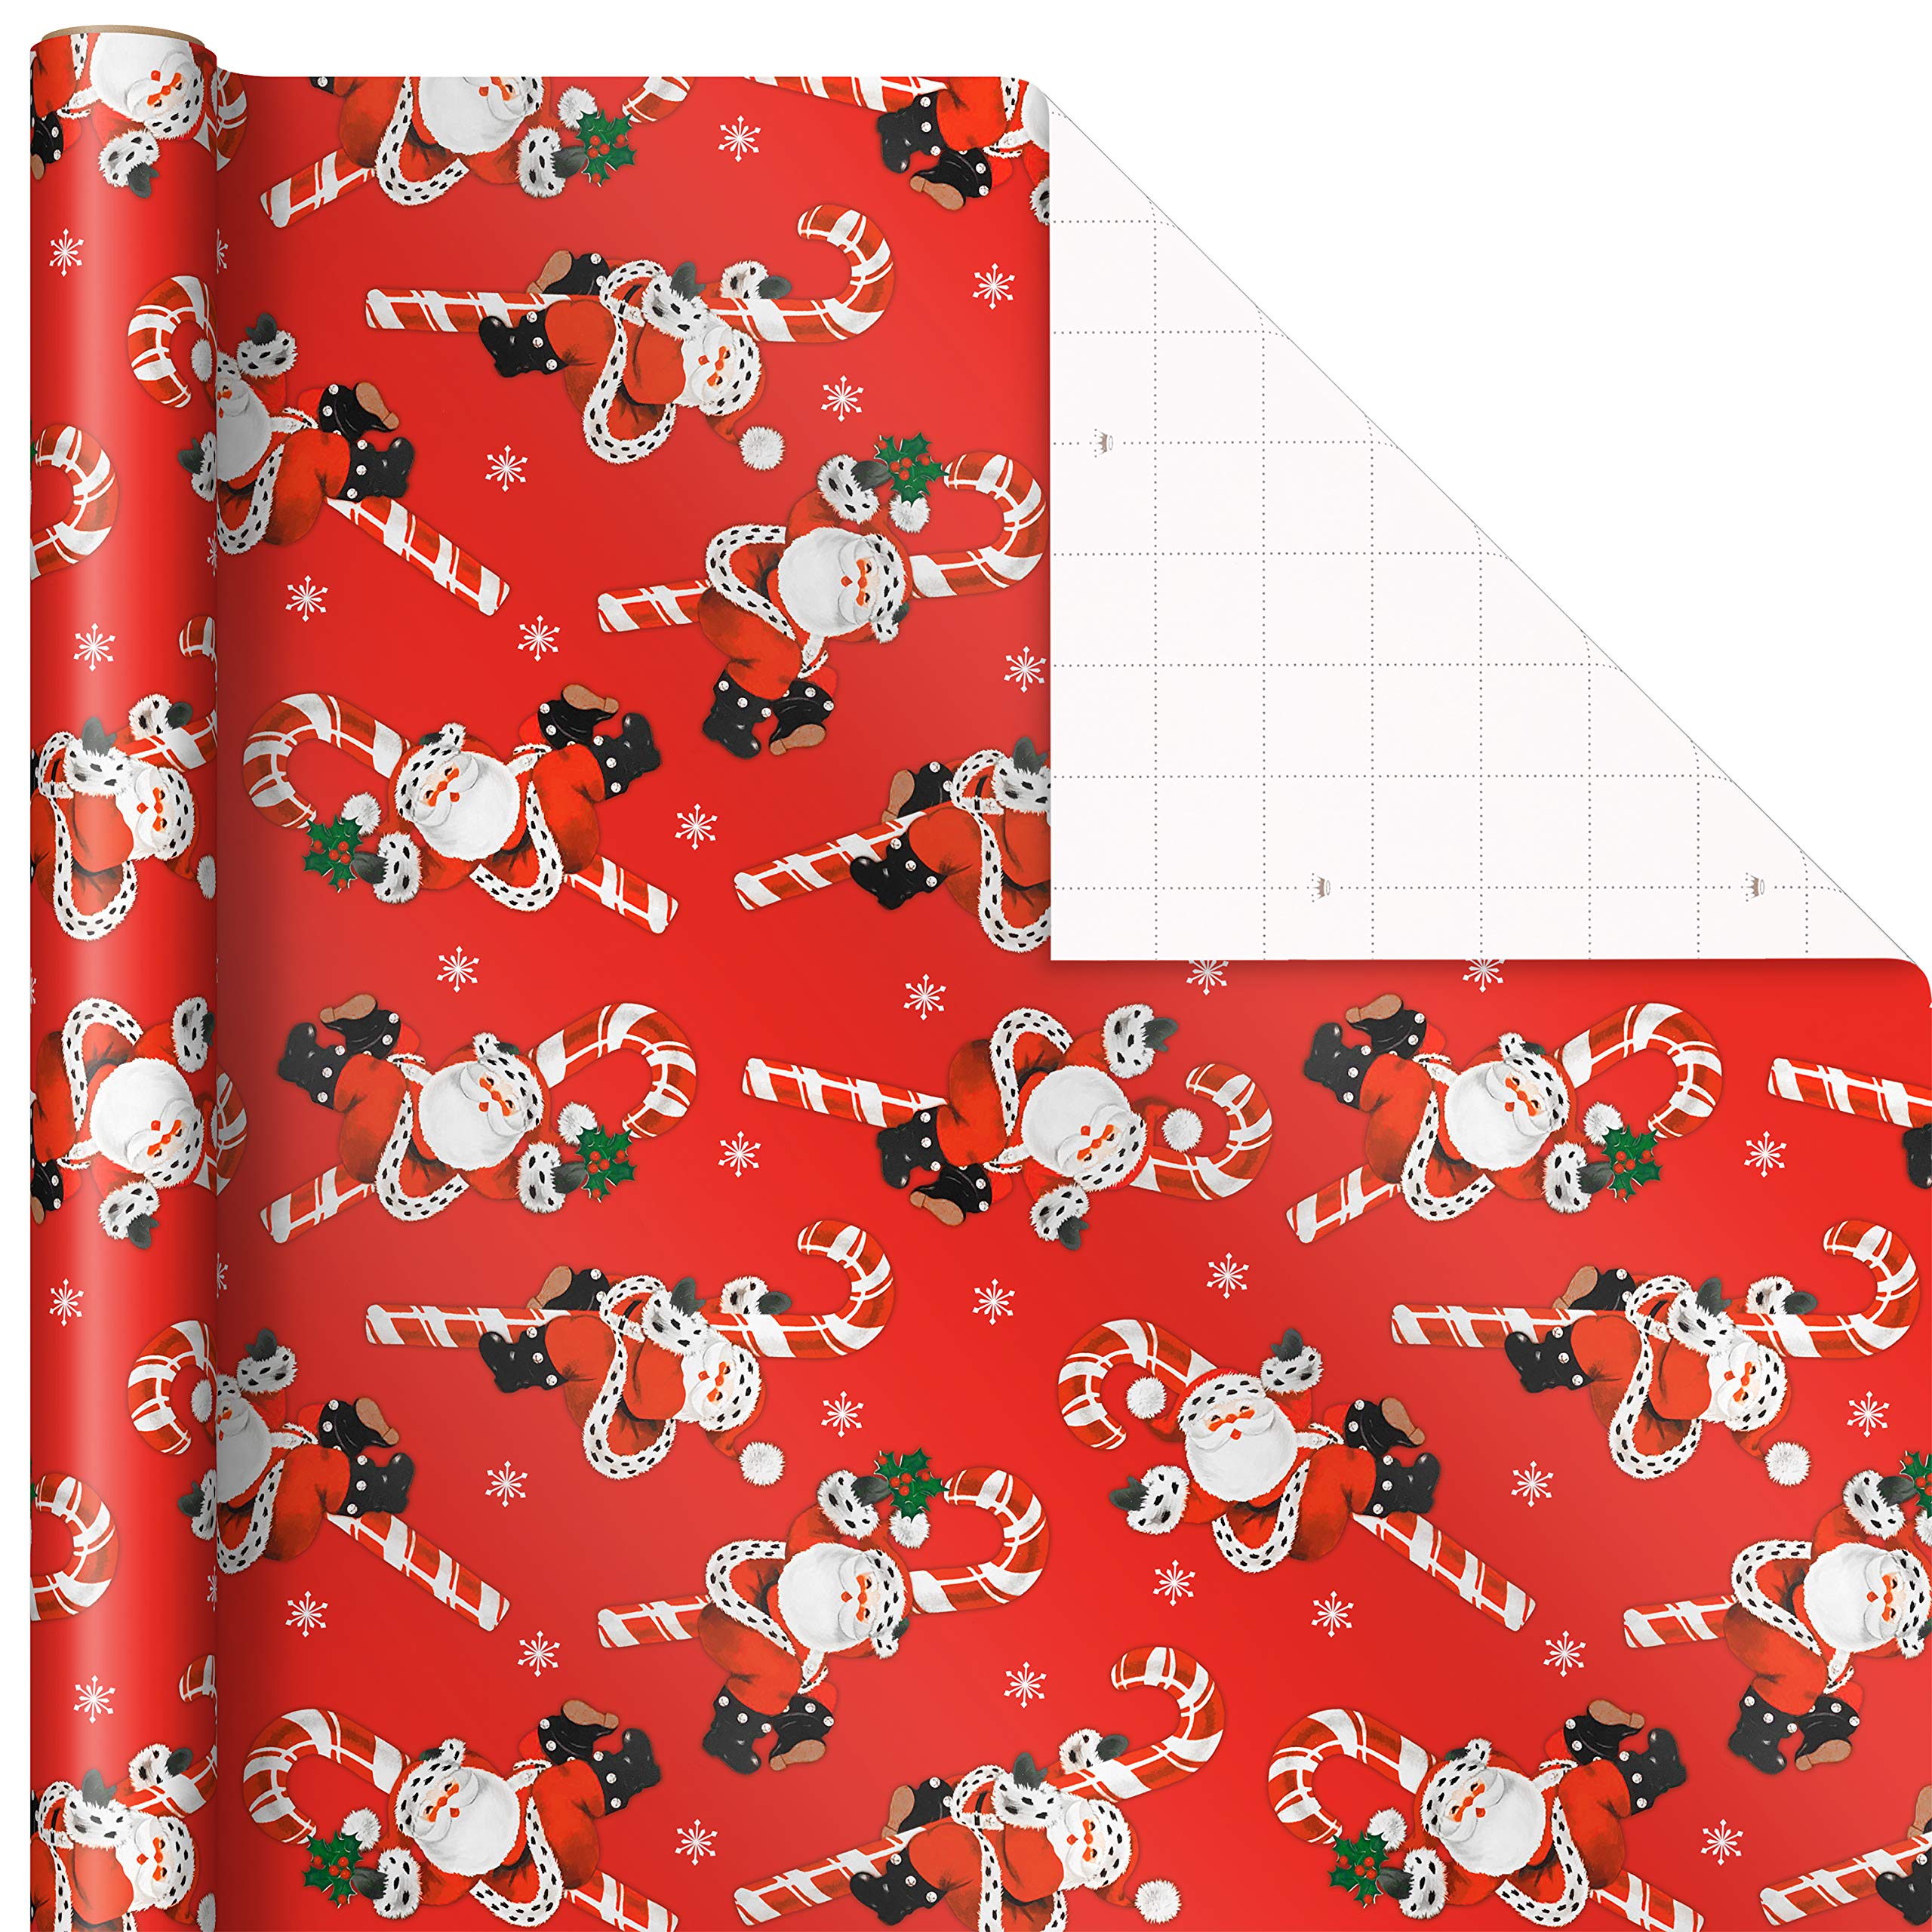 Hallmark Vintage Christmas Wrapping Paper Cut Lines on Reverse (3 Rolls: 120 sq. ft. ttl, Red, White, Navy Blue) Funny Candy Cane Santas, Classic Snowman, 